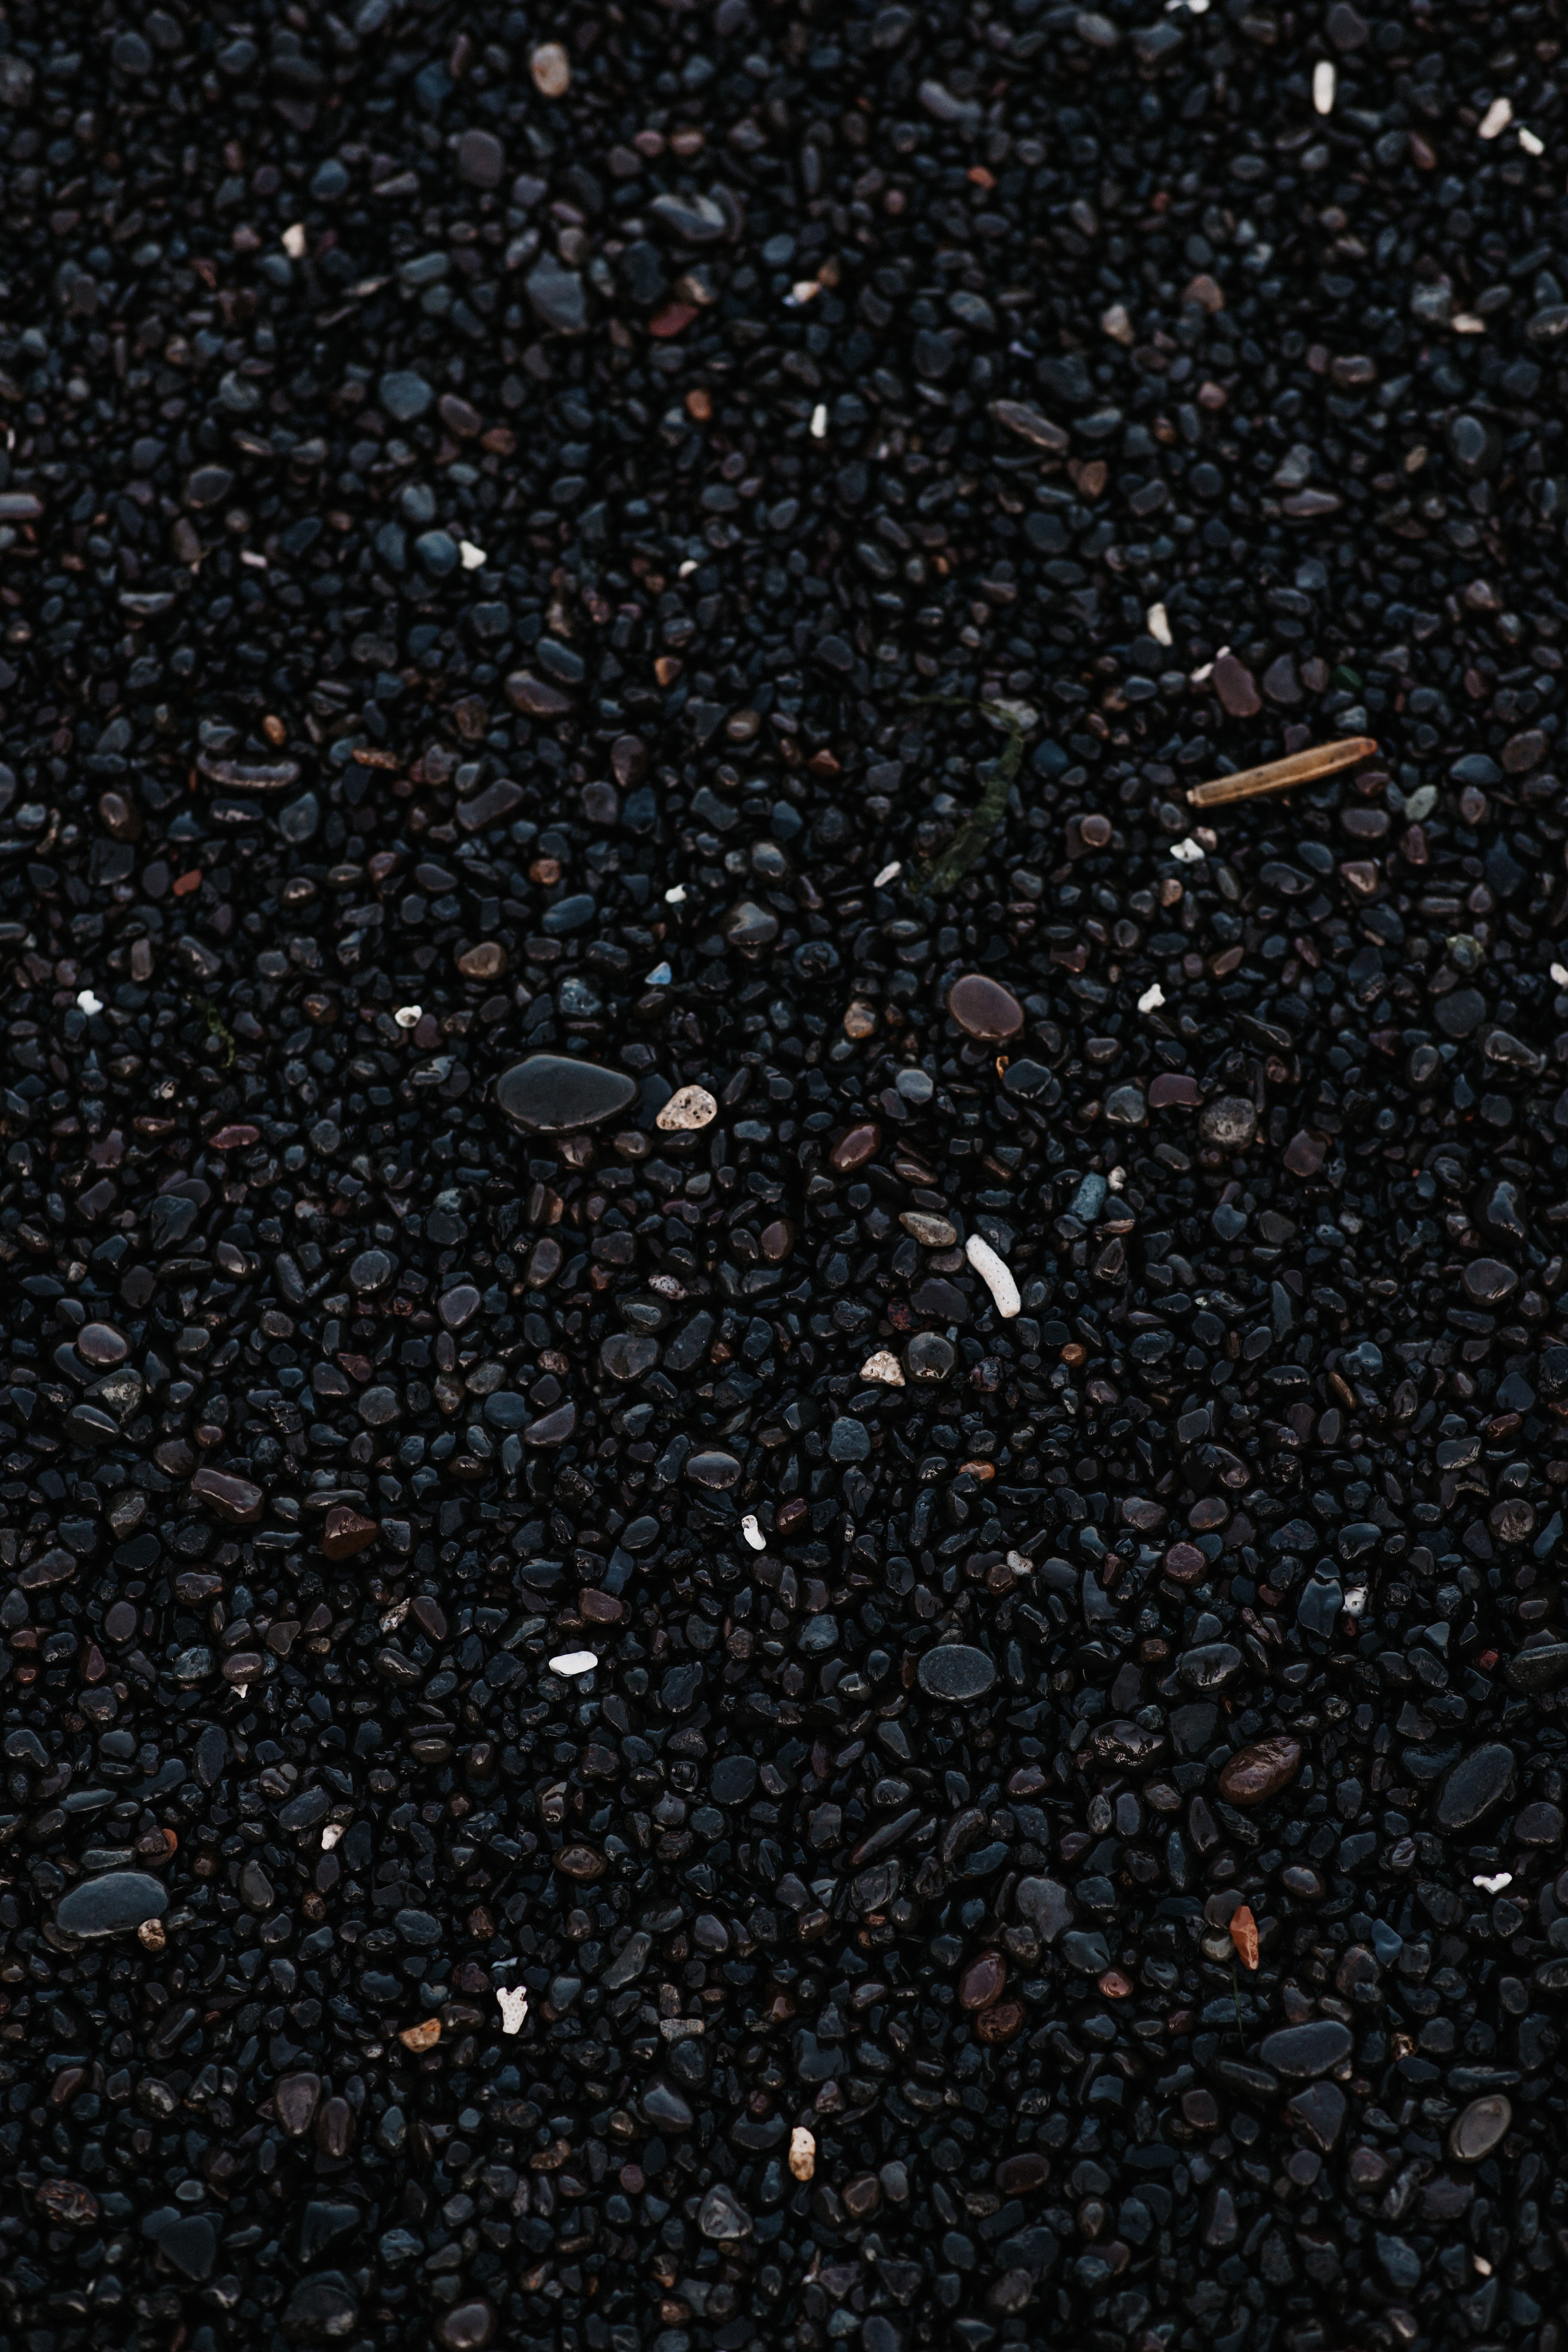 texture, pebble, textures, black, stones, wet cell phone wallpapers